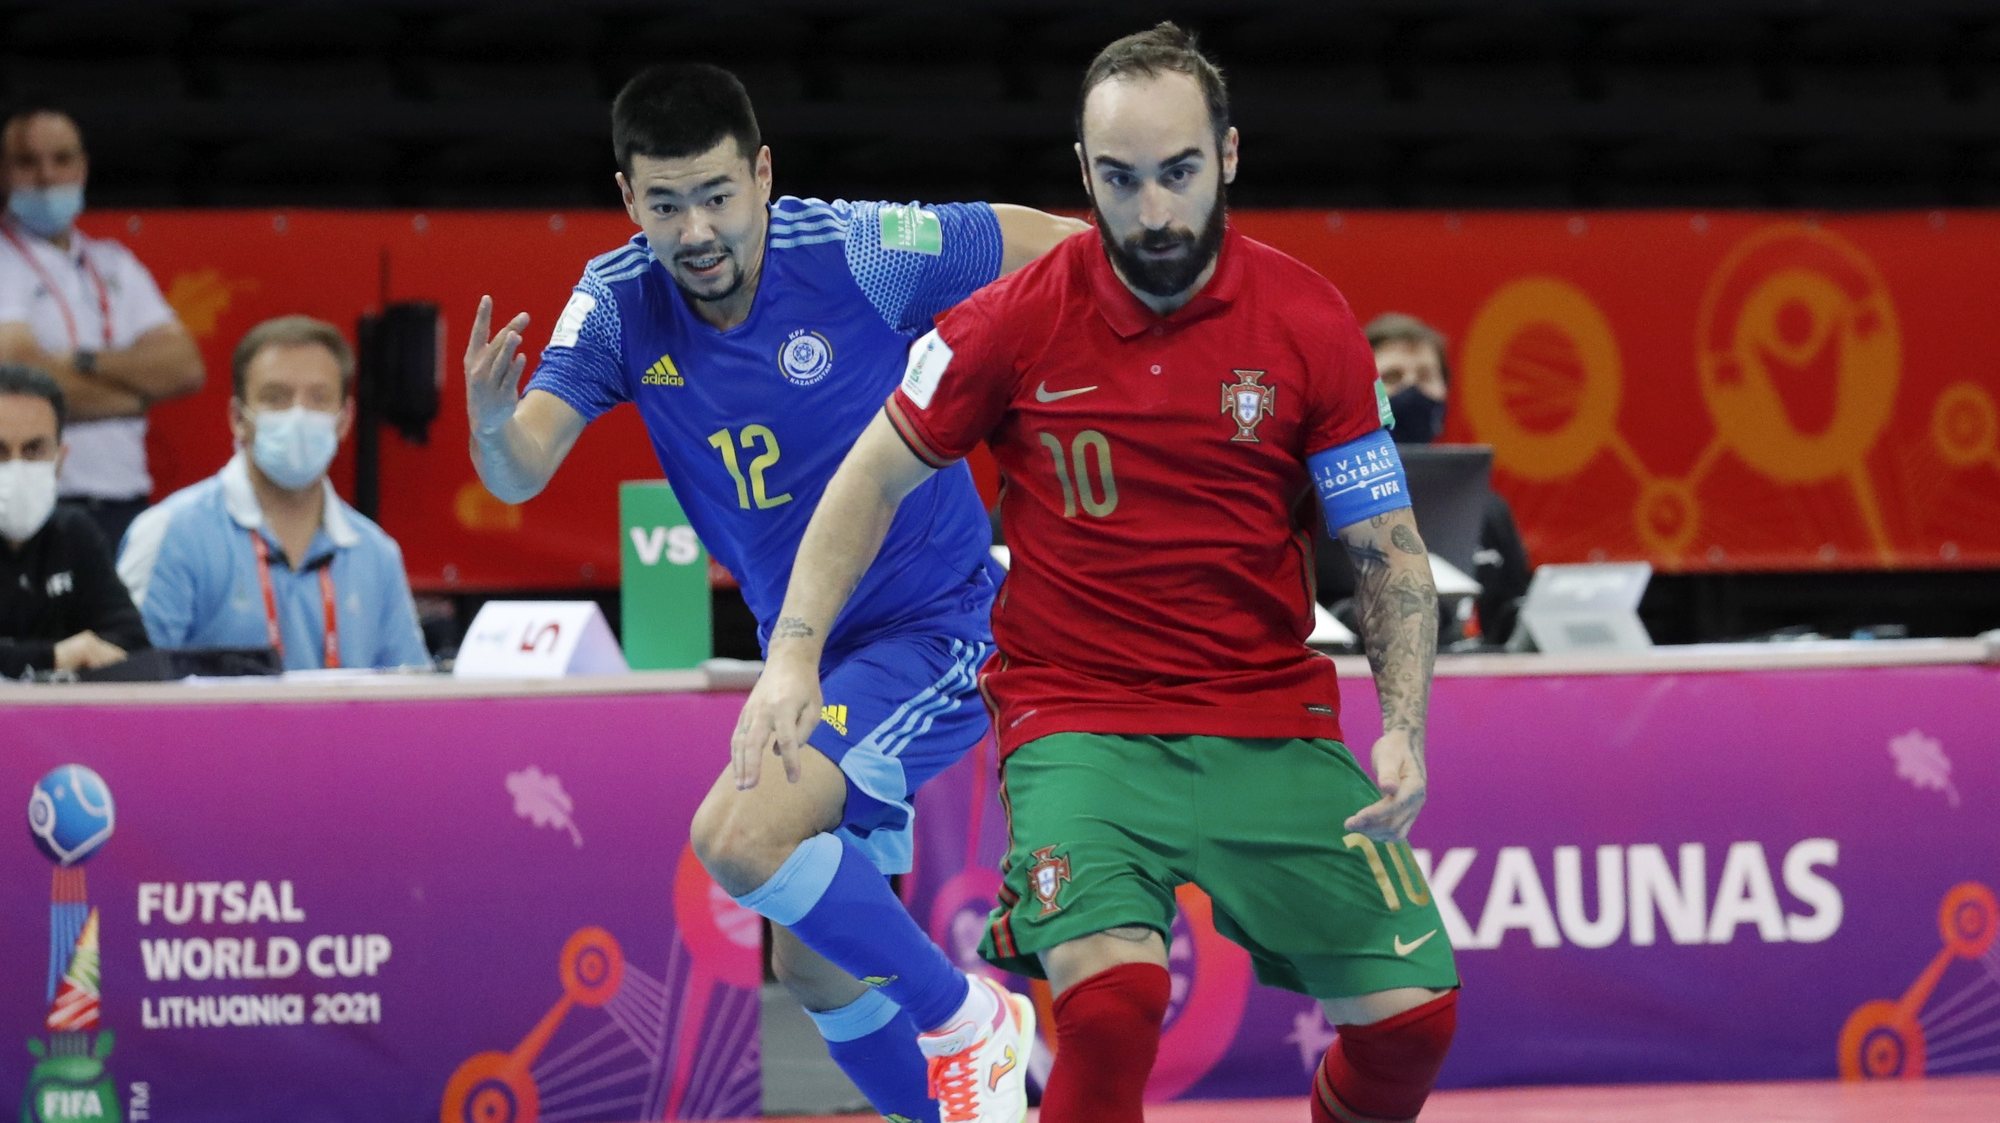 epa09498034 Portugal&#039;s Ricardinho (R) and Kazakhstan&#039;s Tursagulov (L) in action during the FIFA Futsal World Cup Lithuania 2021 semi final match between Portugal and Kazakhstan in Kaunas, Lithuania, 30 September 2021.  EPA/TOMS KALNINS